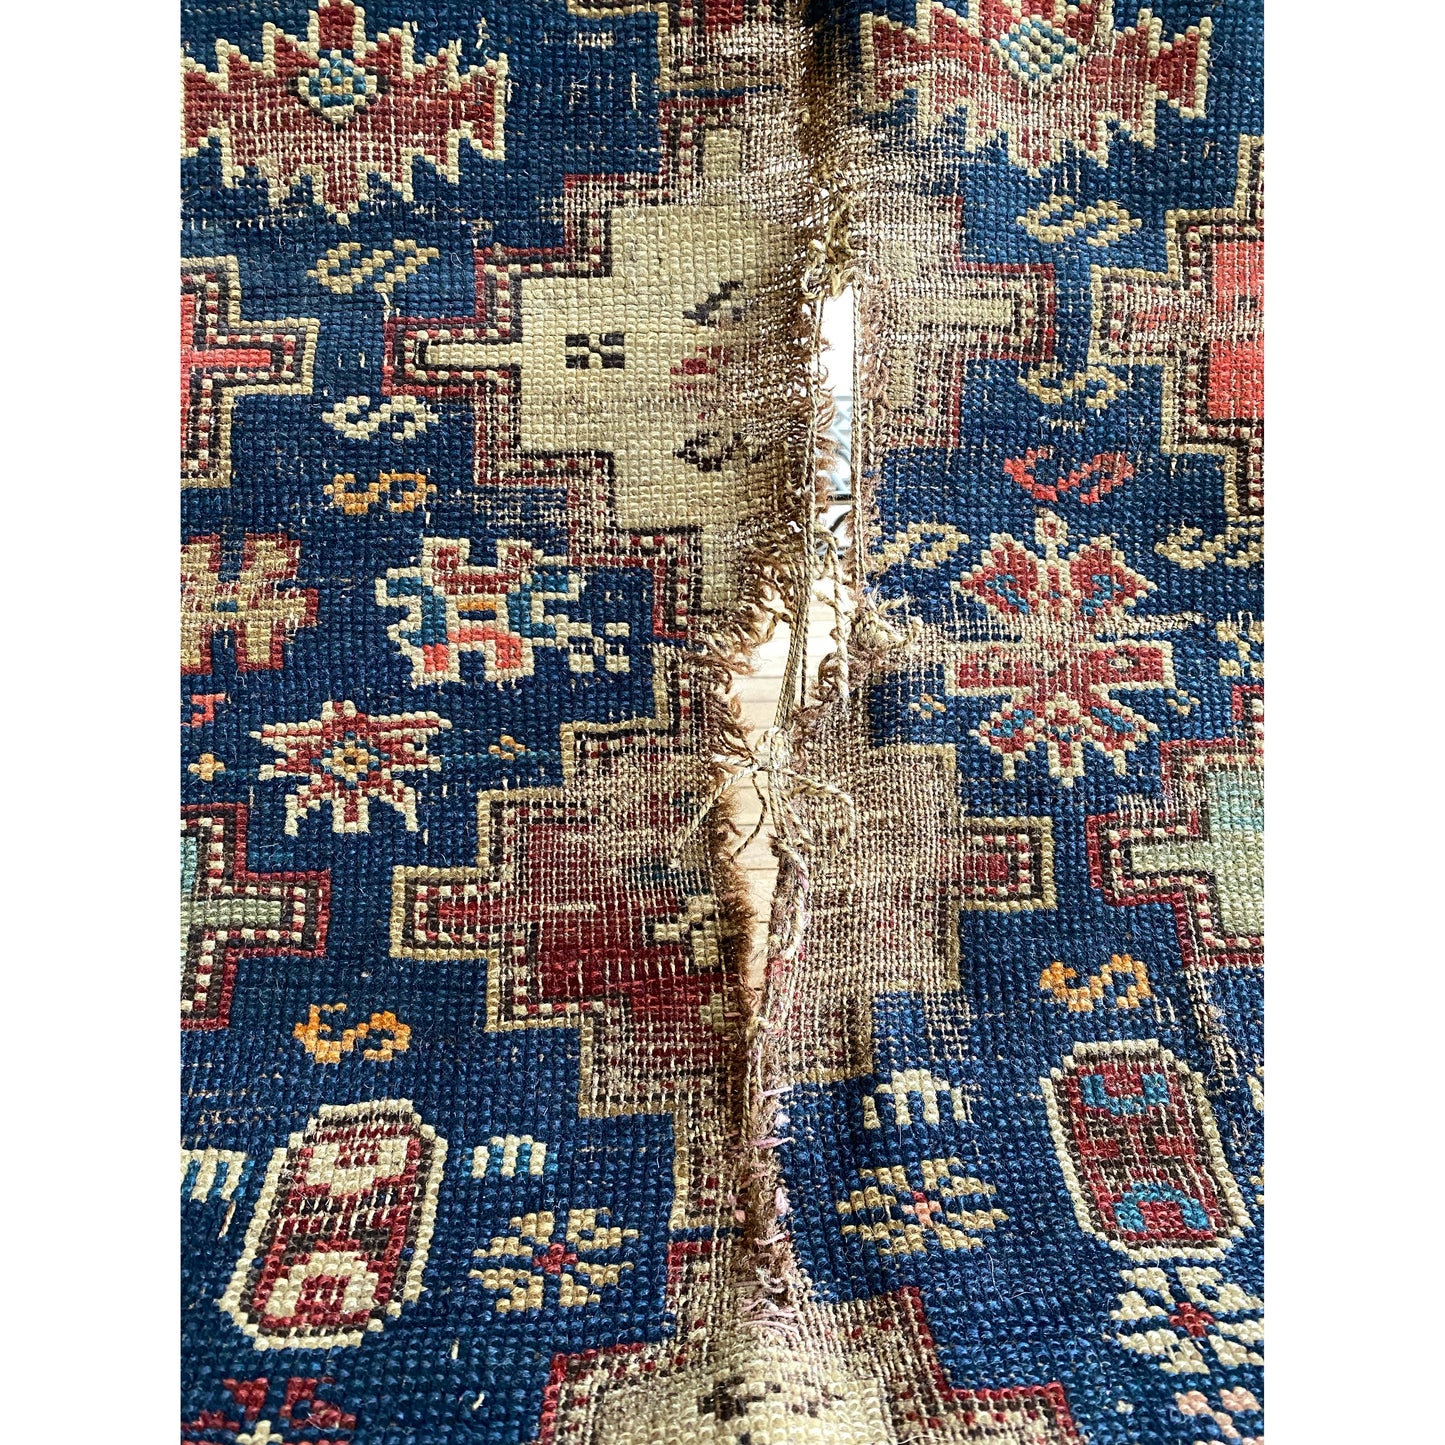 Antique Hand-knotted Persian Rug (5' x 3' 4")